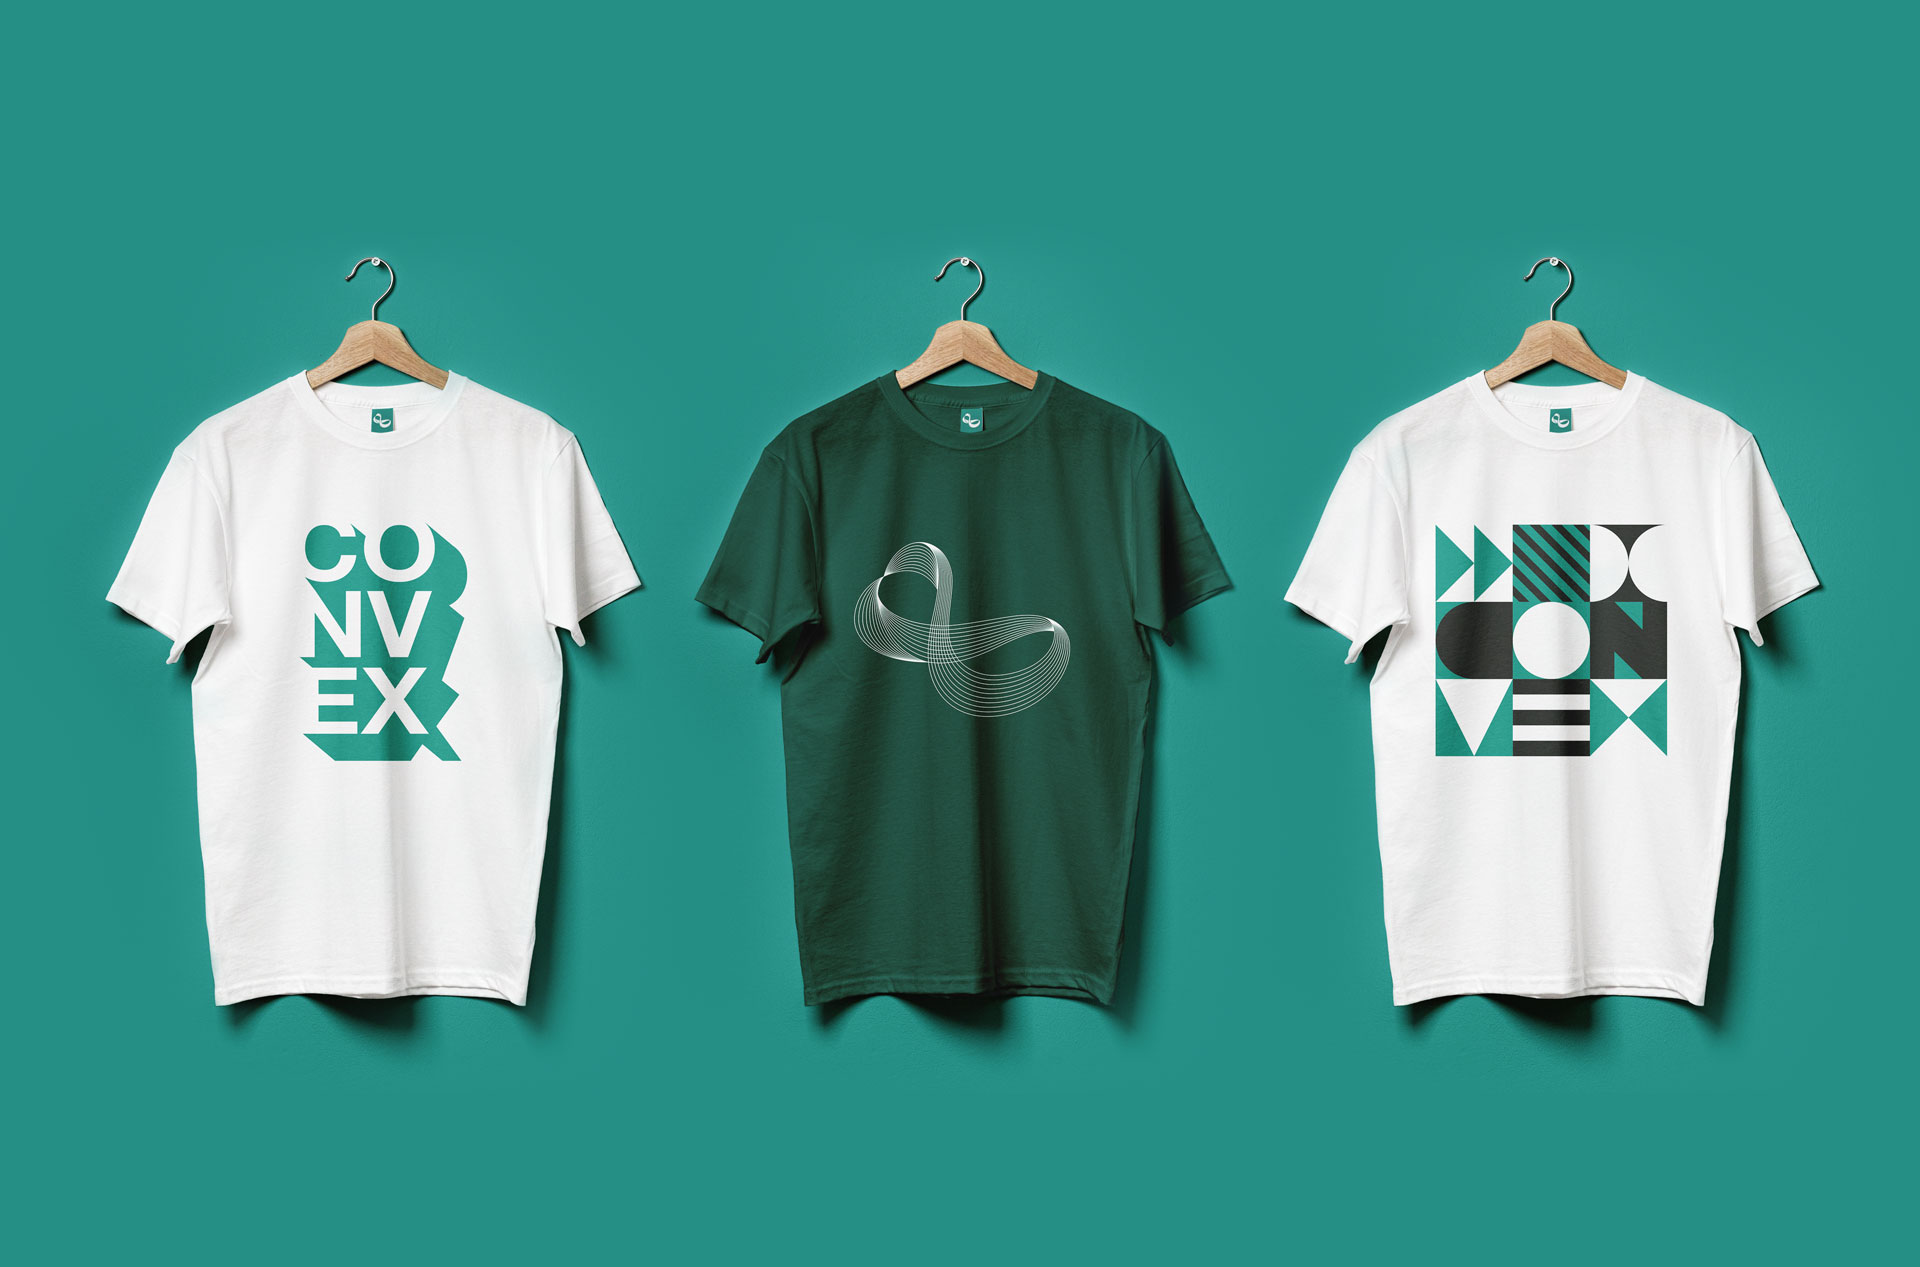 Three t-shirts hanging, two white and one green. All have modern designs